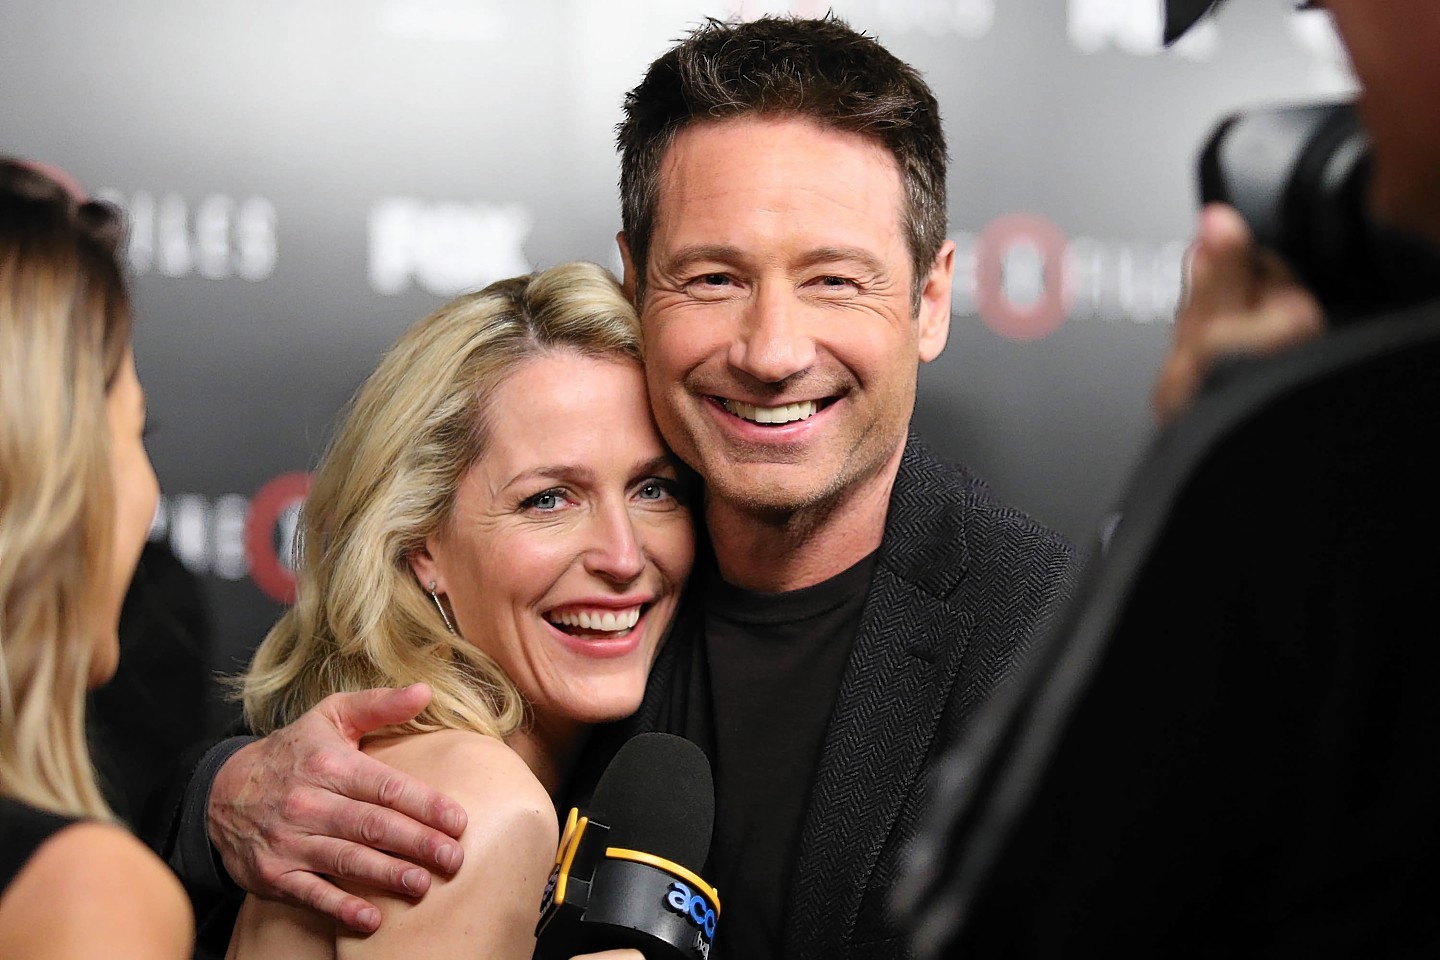 Gillian Anderson and David Duchovny share a laugh during an interview at the season premiere of 'The X-Files